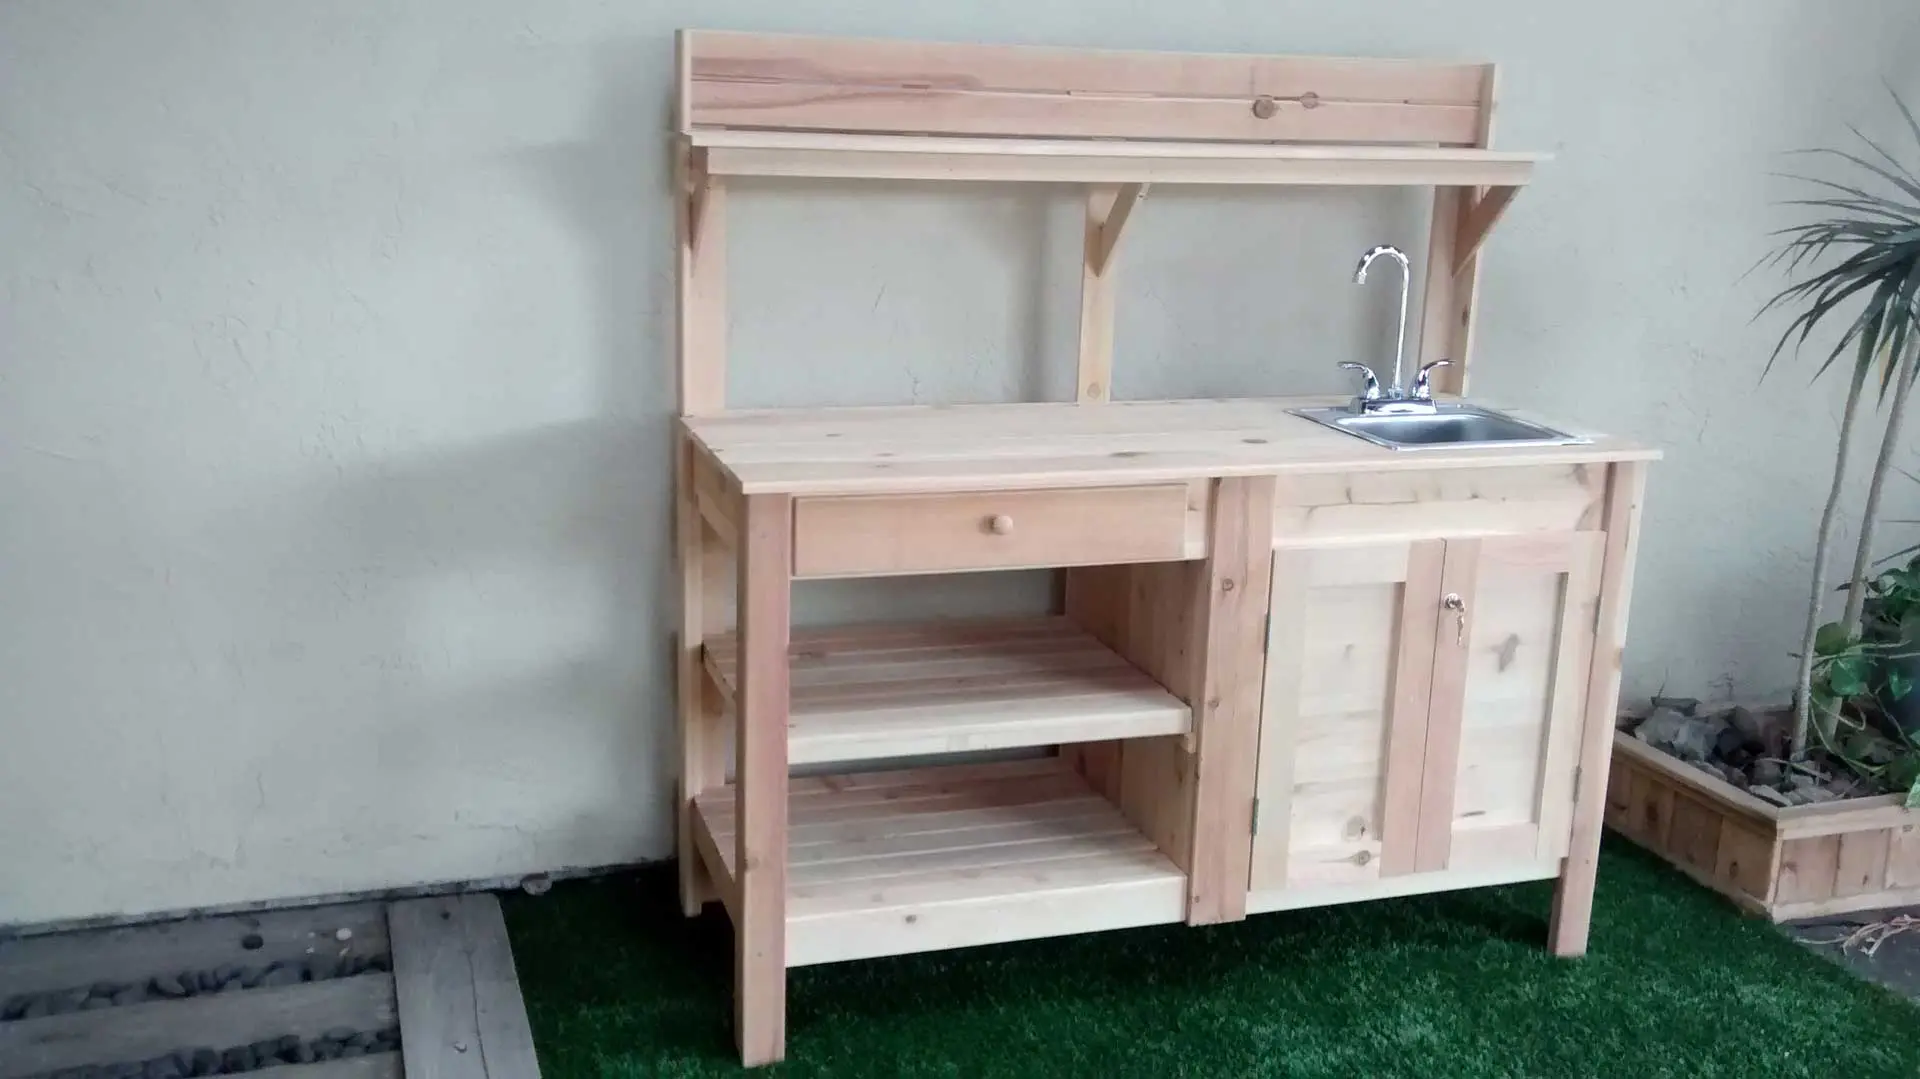 A wooden bench with sink and shelves on the side.